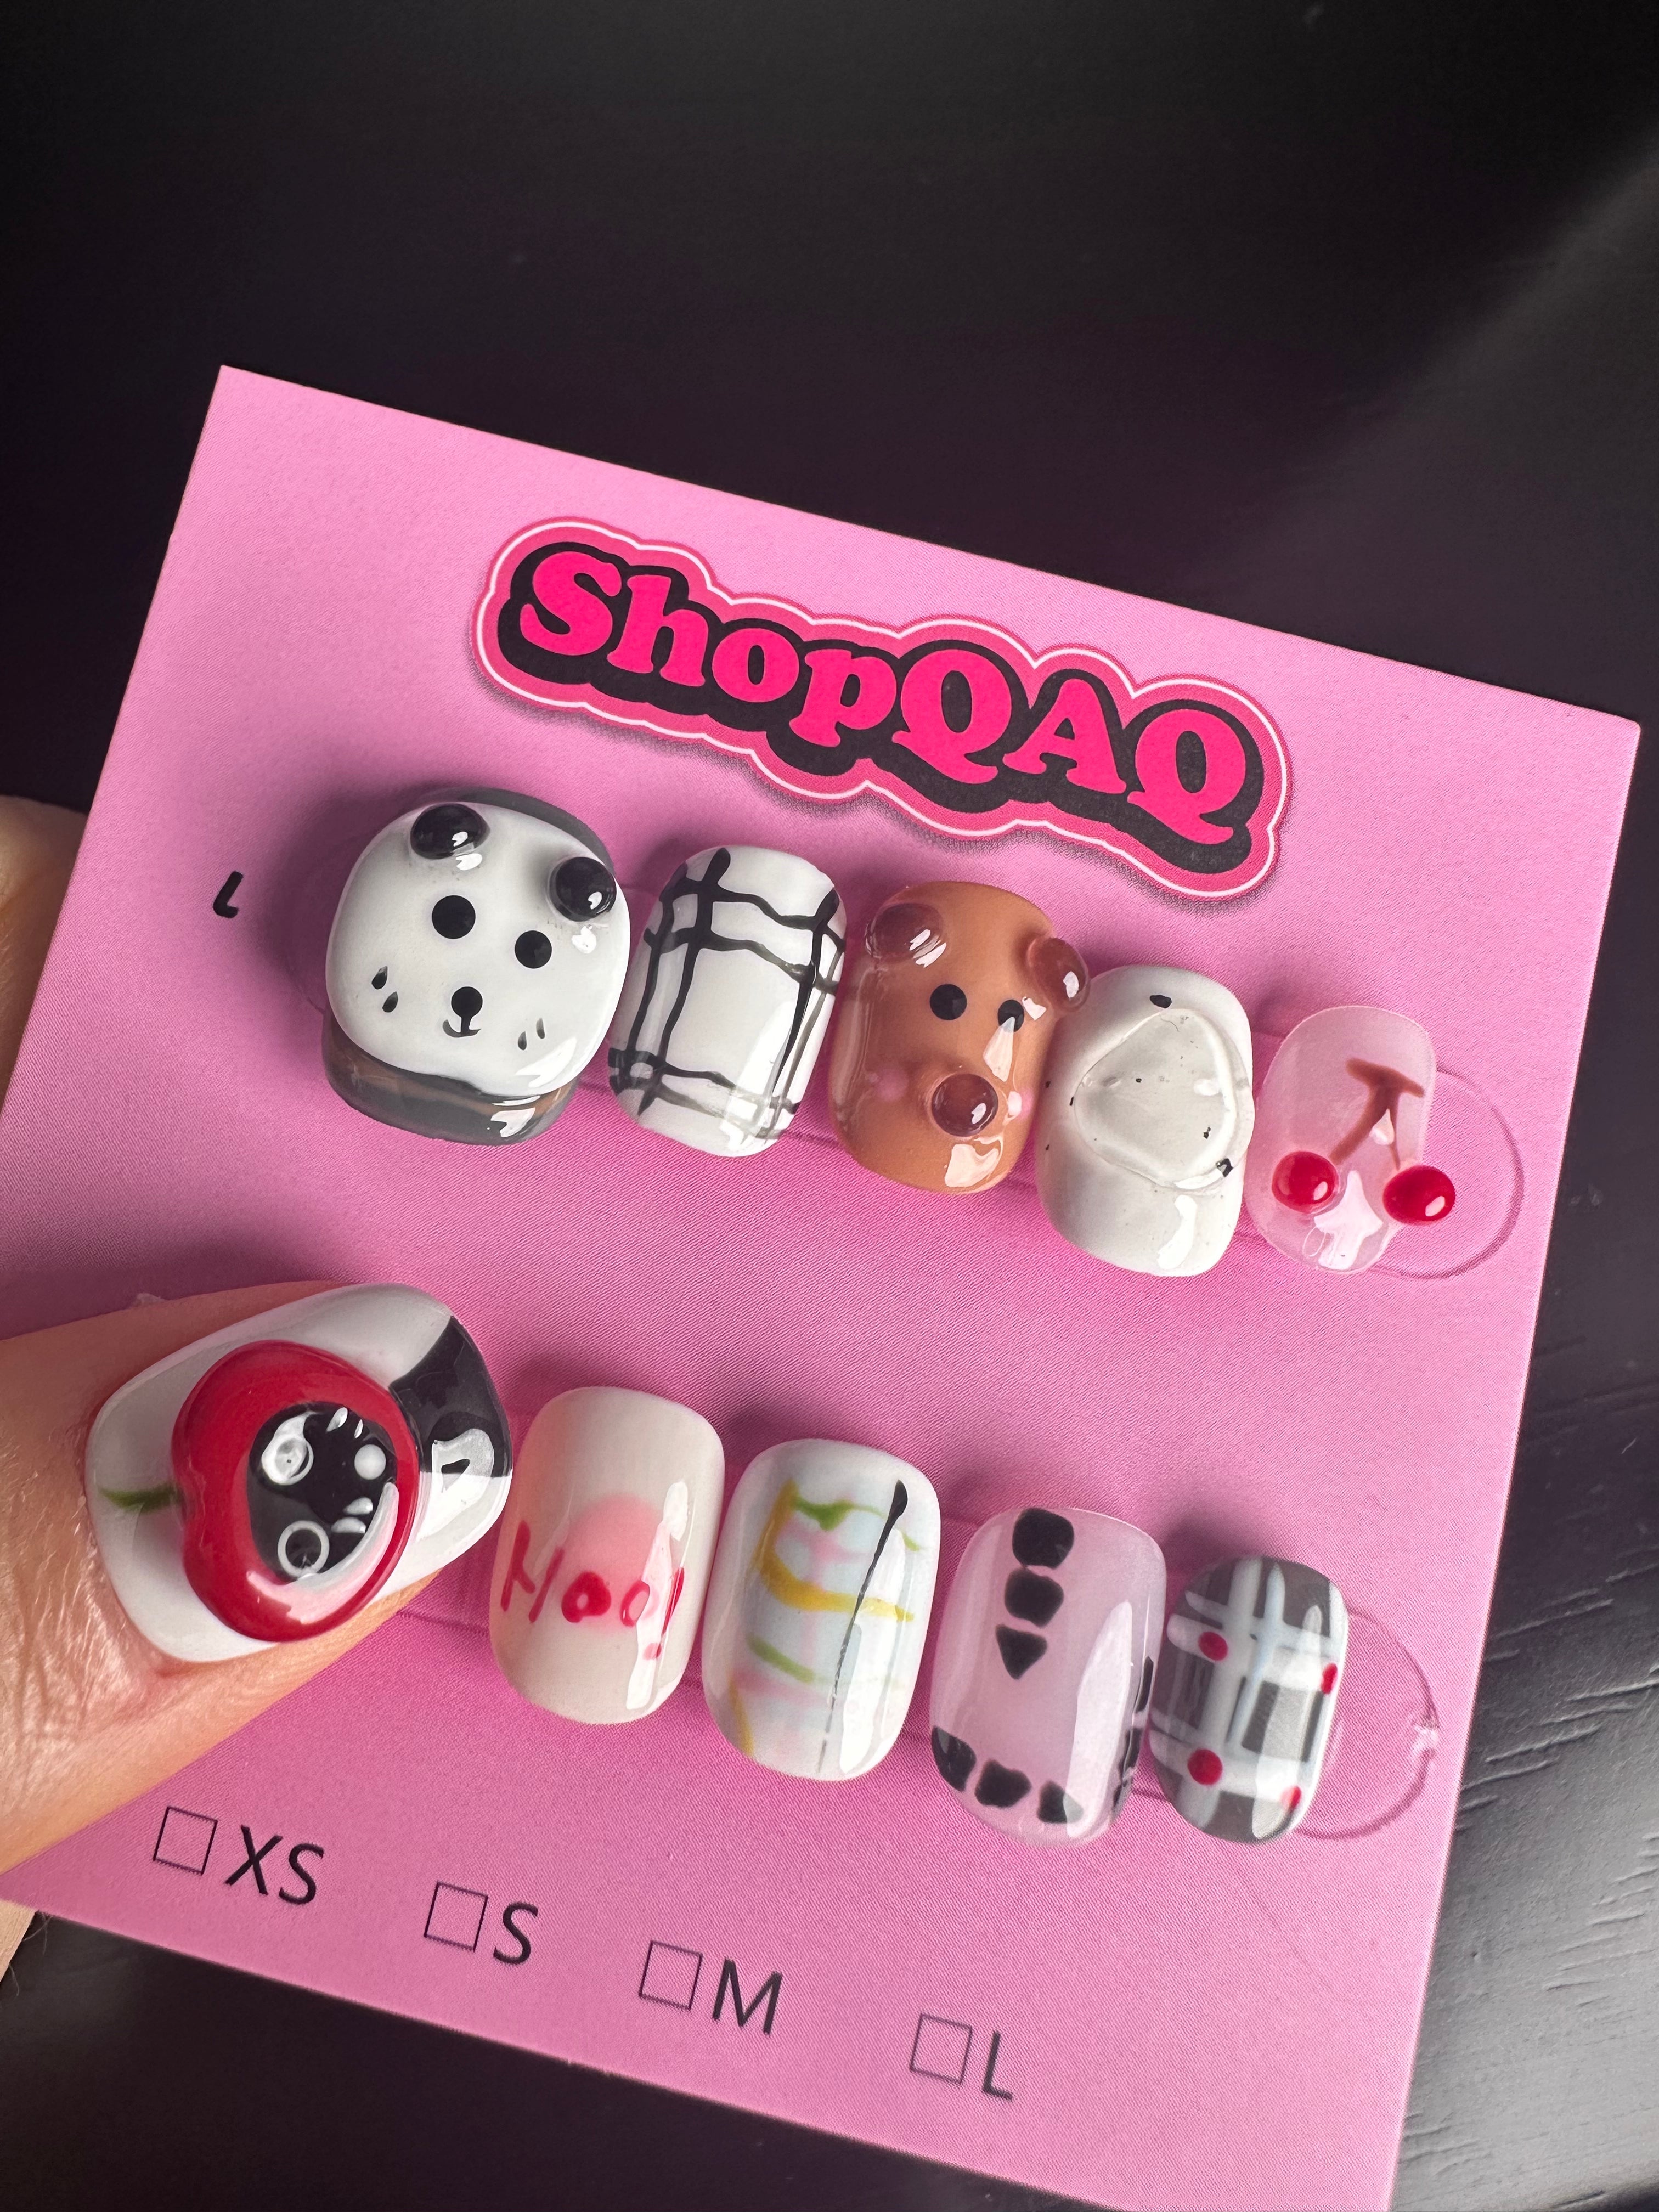 Custom Handcrafted 3D Cute Hand-Painted Apple Nails False Nails from SHOPQAQ